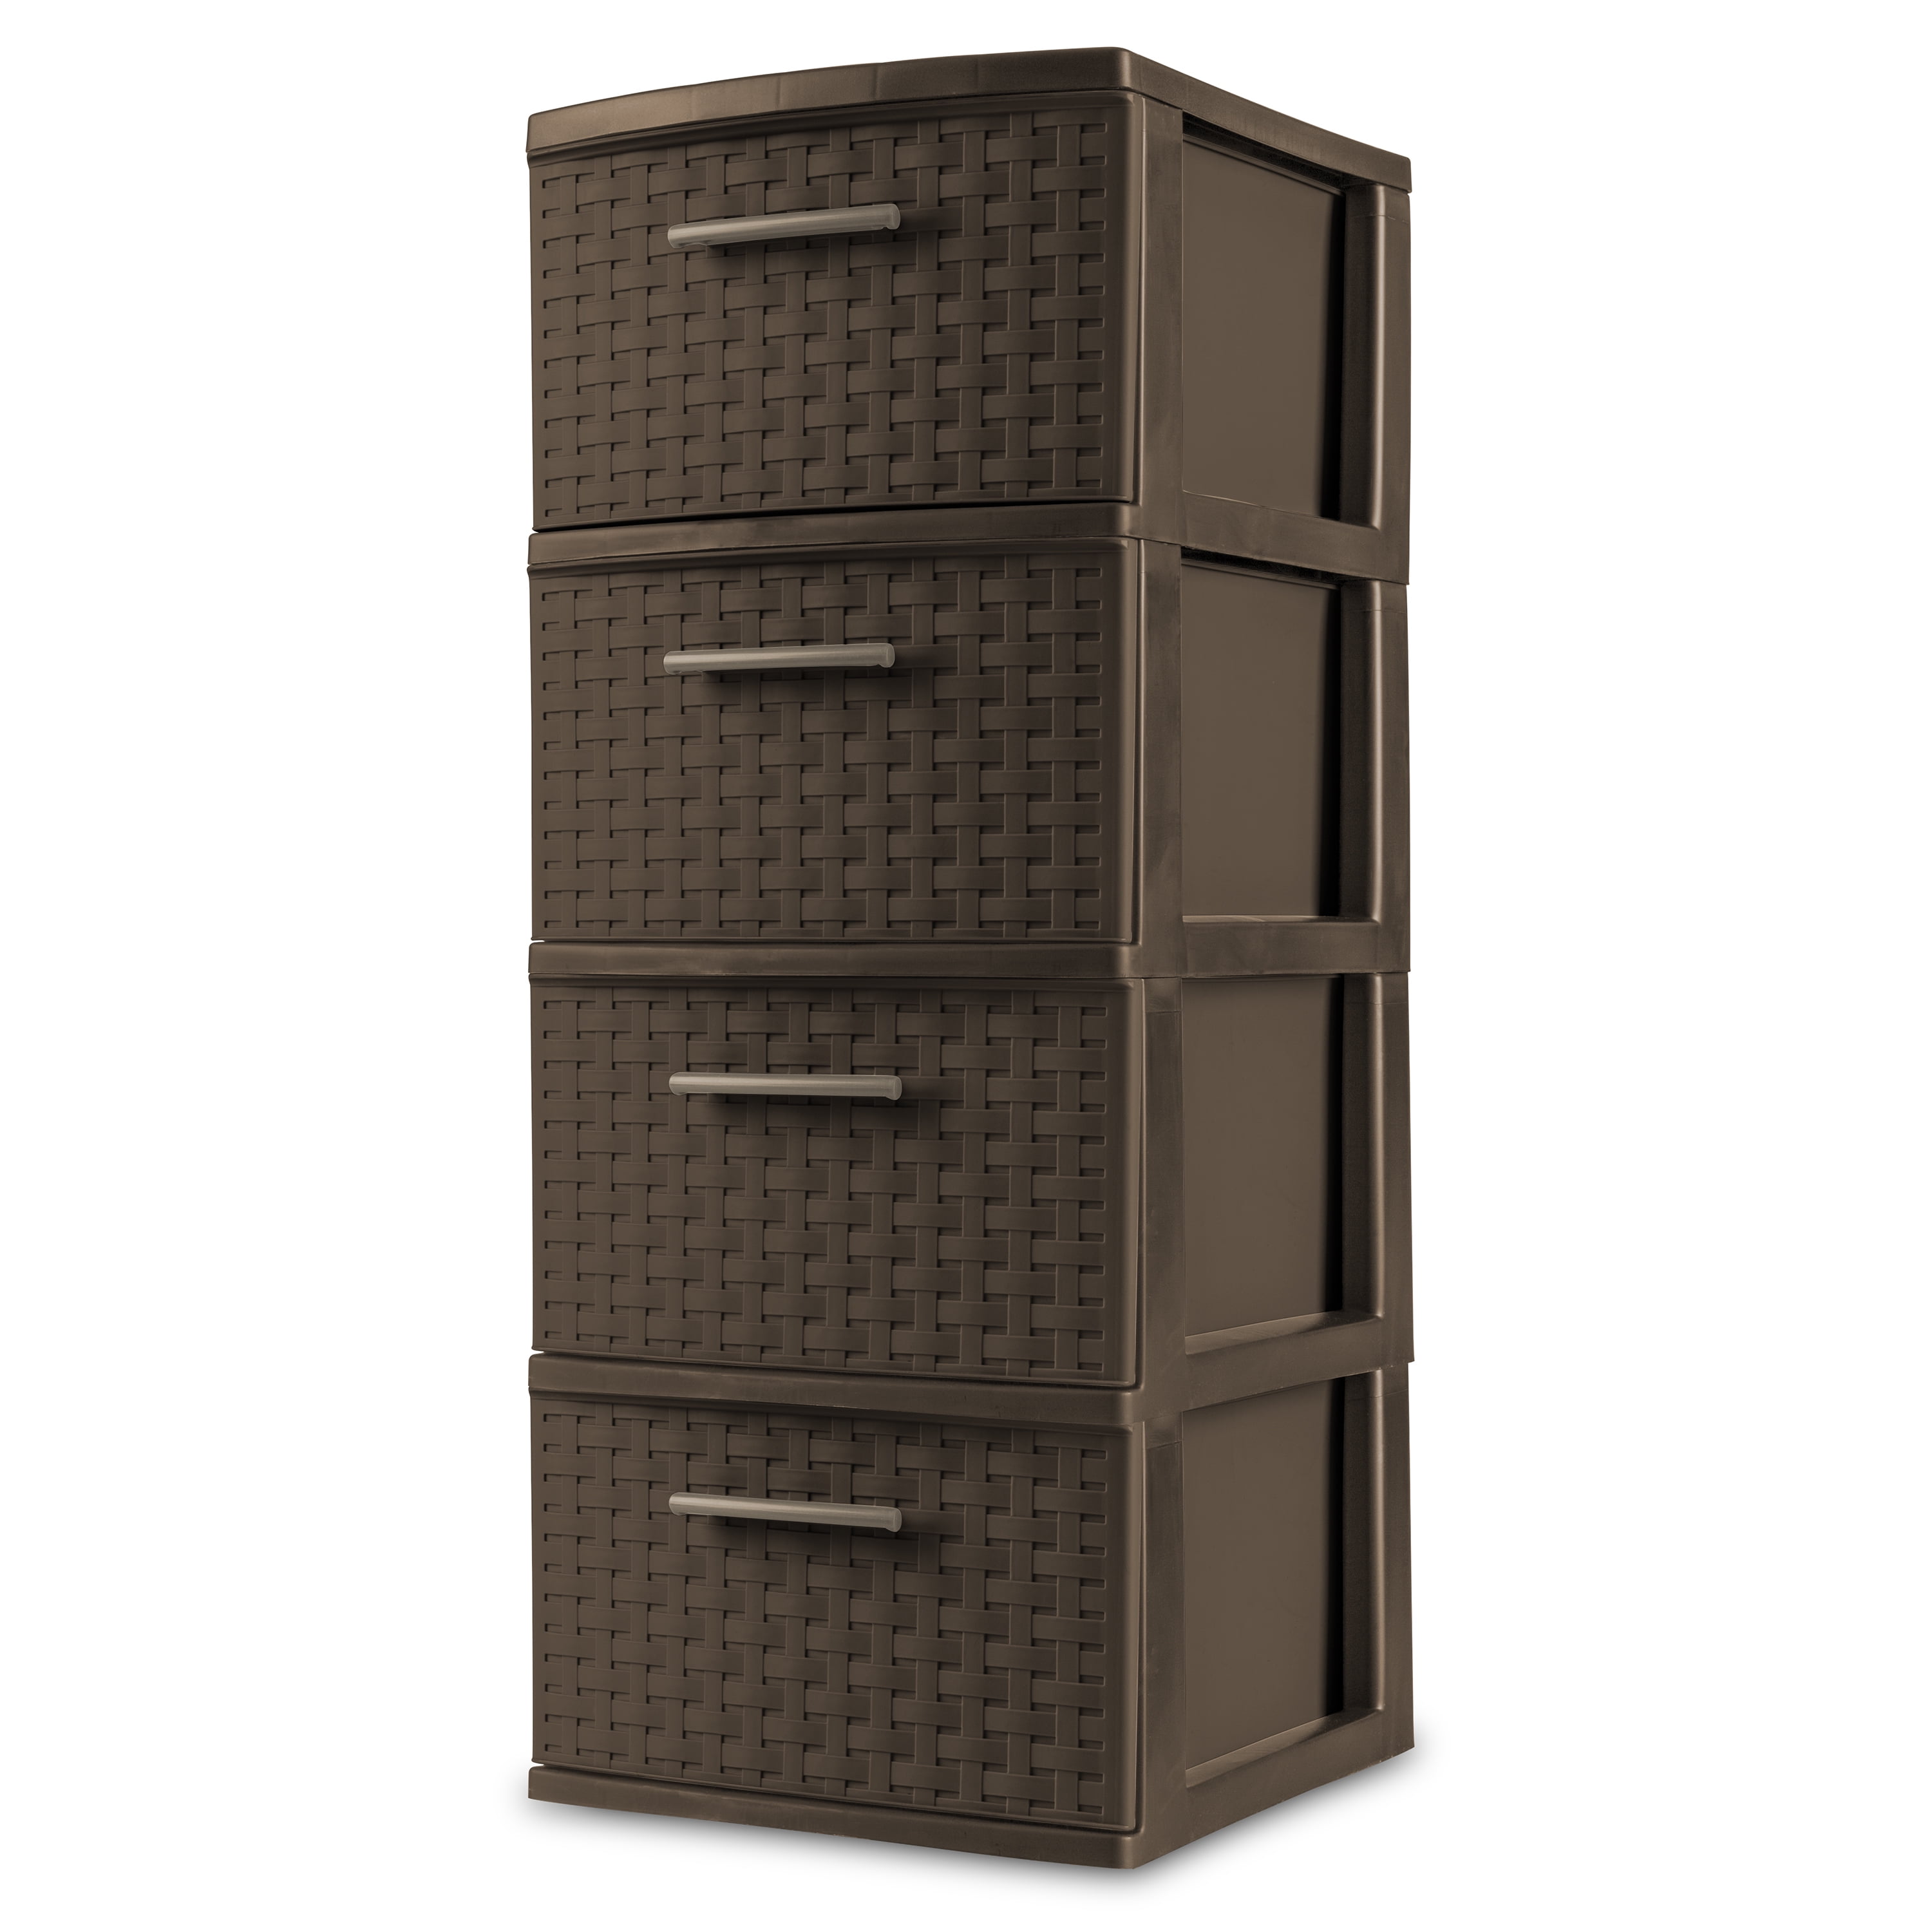 Details about   4 Drawer Storage Cabinet Sterilite Organizer Portable Wide Weave Tower 2 Pack 